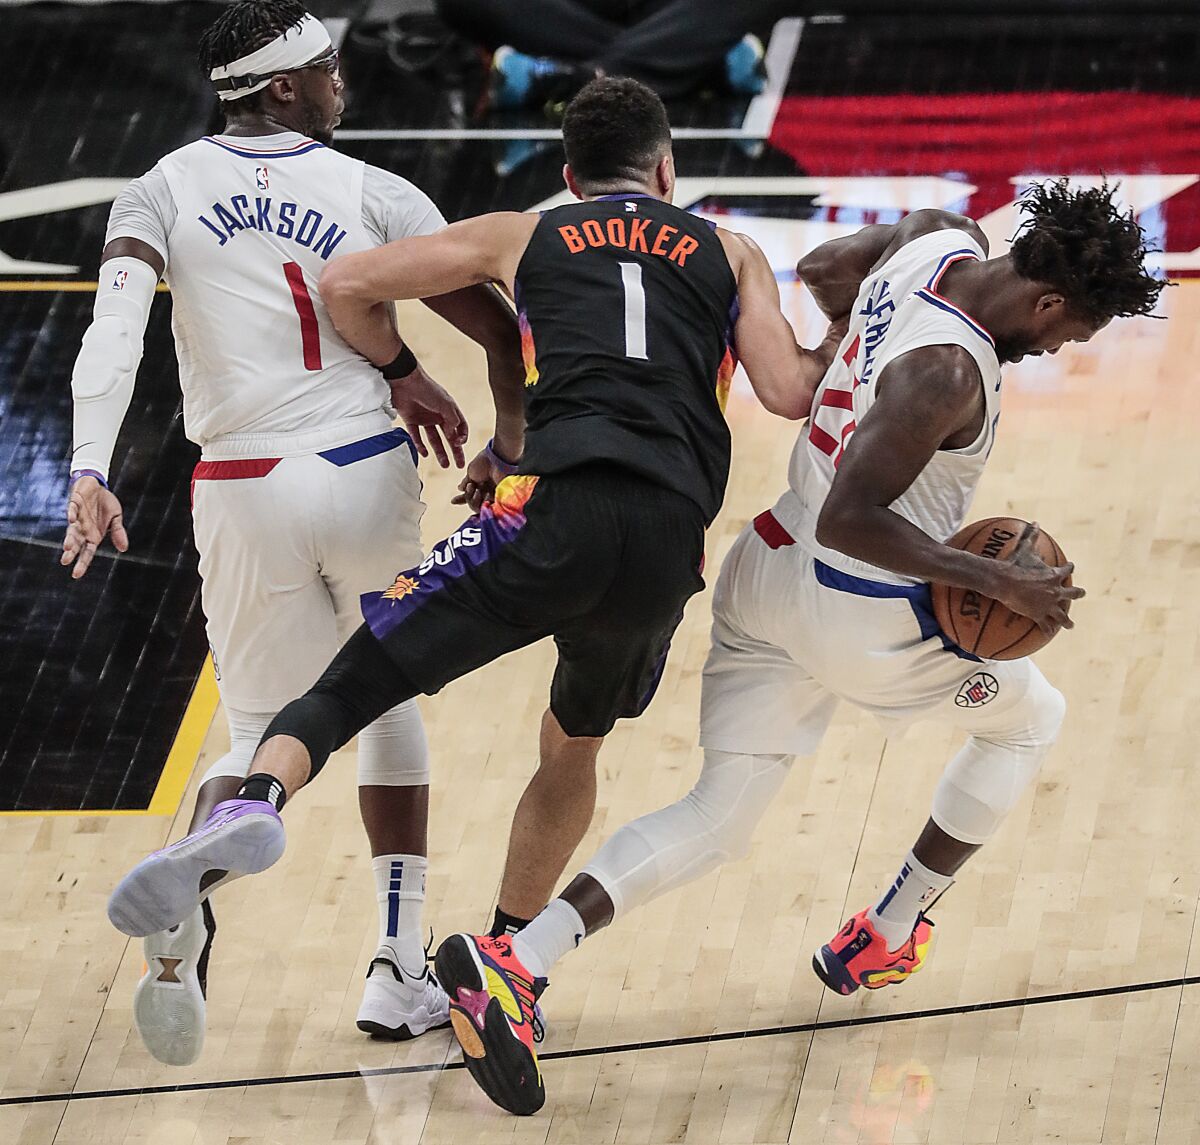 Clippers guard Patrick Beverley steals the ball from Suns guard Devin Booker during Game 2.